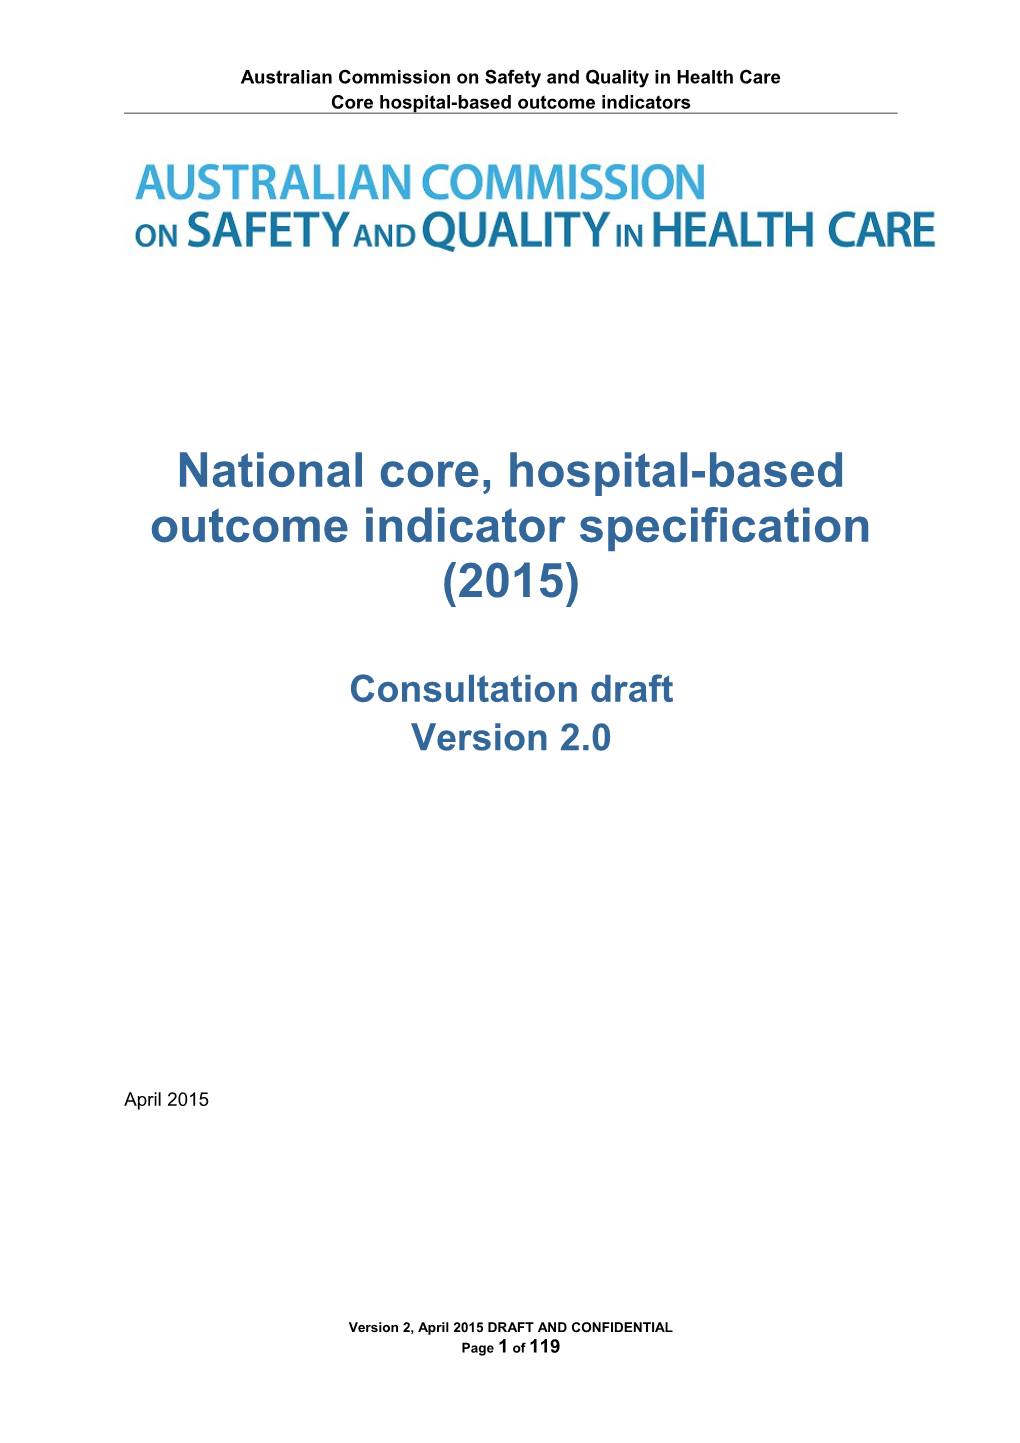 National Core, Hospital-Based Outcome Indicator Specification (2015)